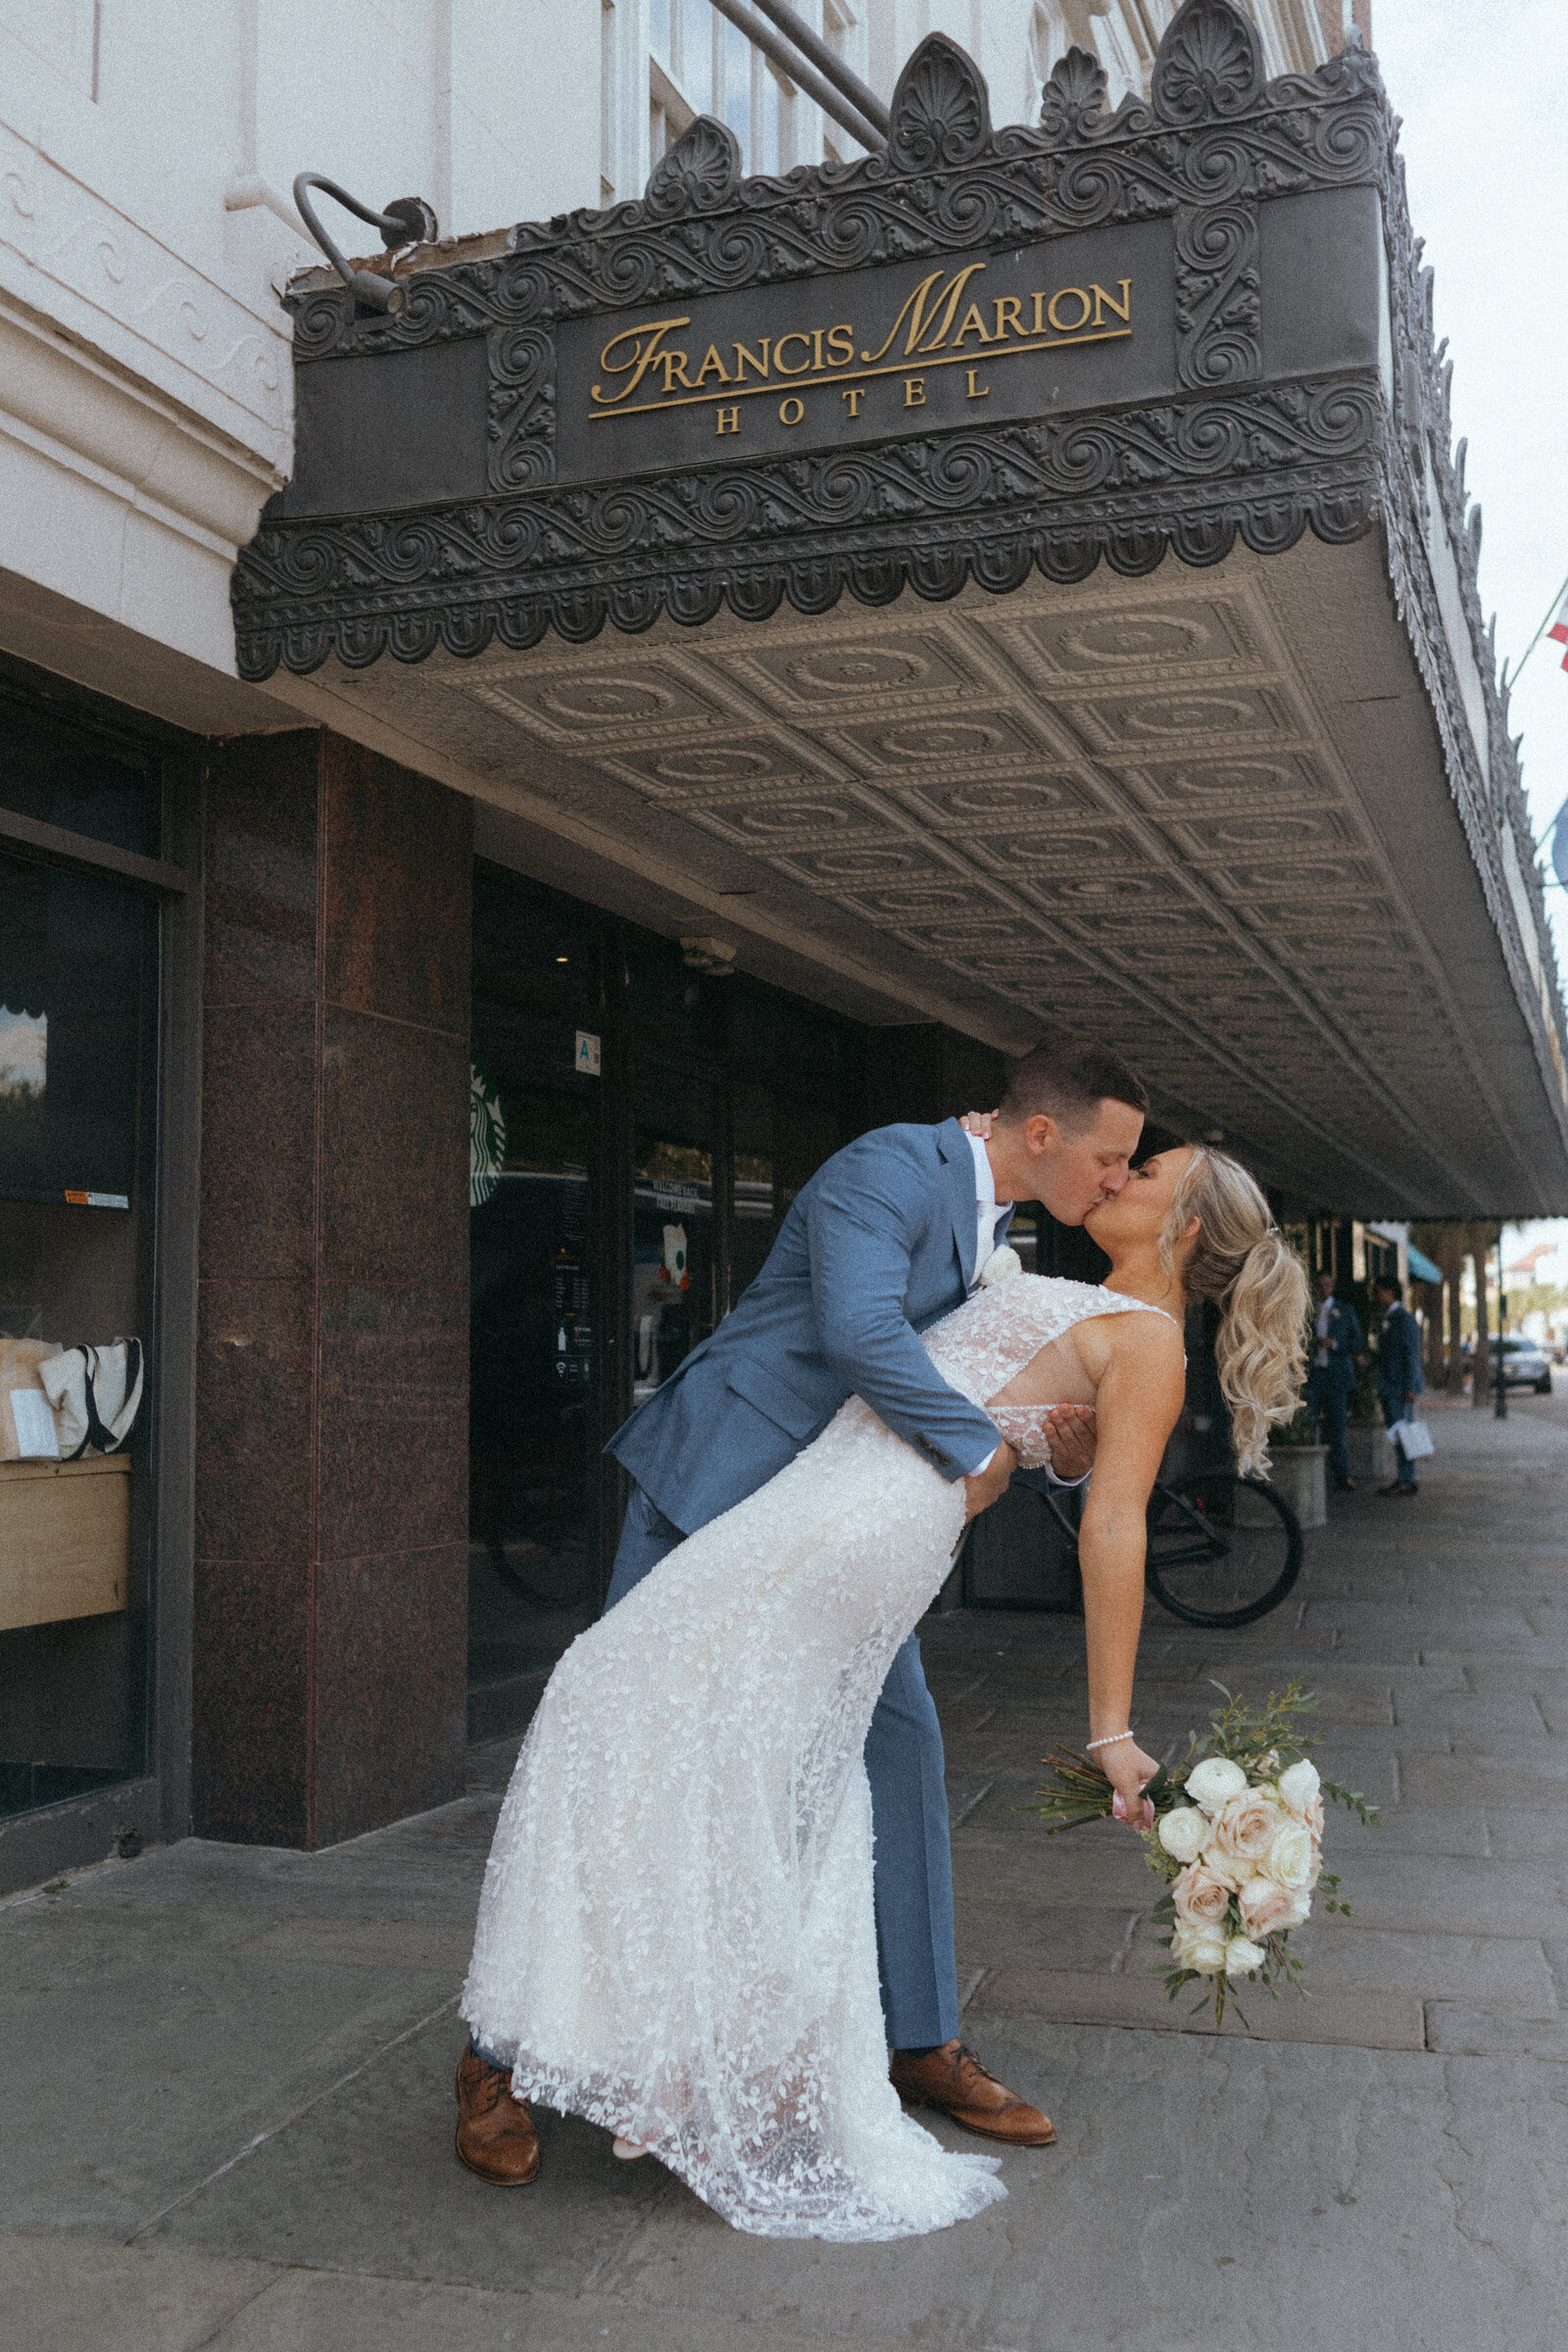 Charleston Wedding at the Francis Marion Hotel in Downtown Charleston